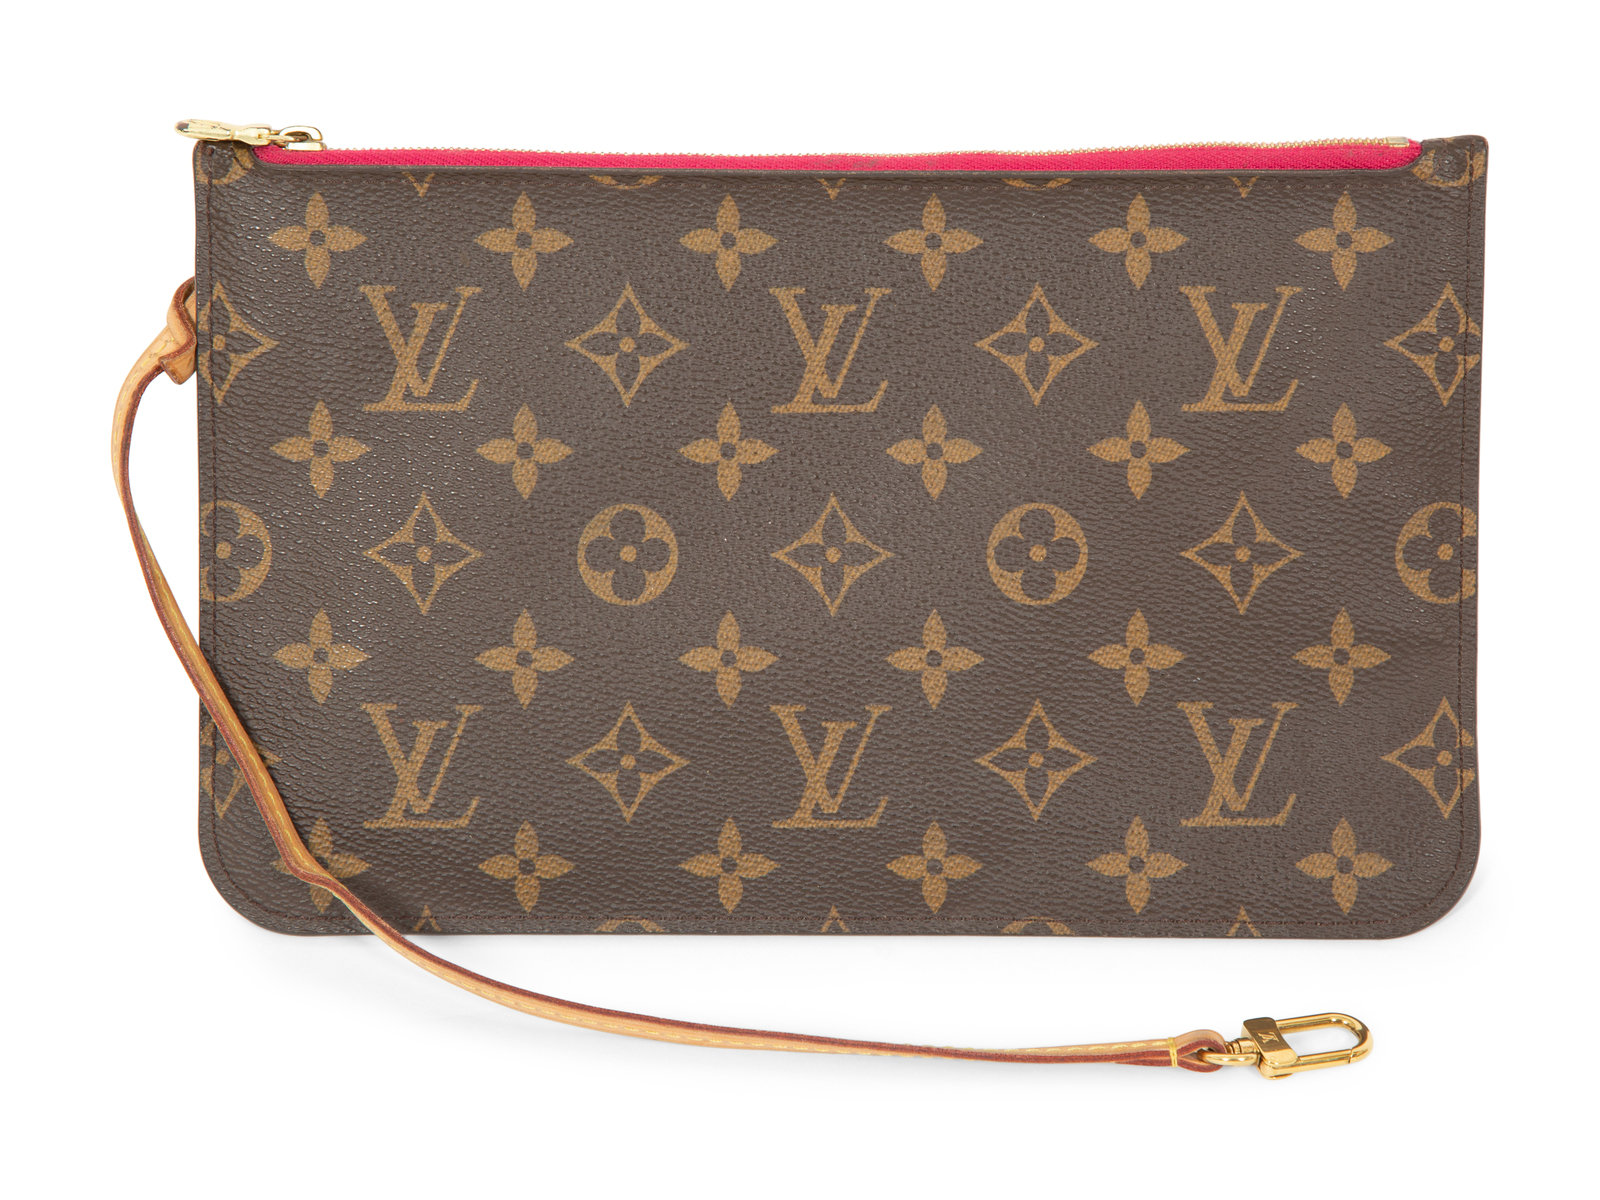 Made in USA Louis Vuitton Bags: Does Country of Origin matter in Luxury?